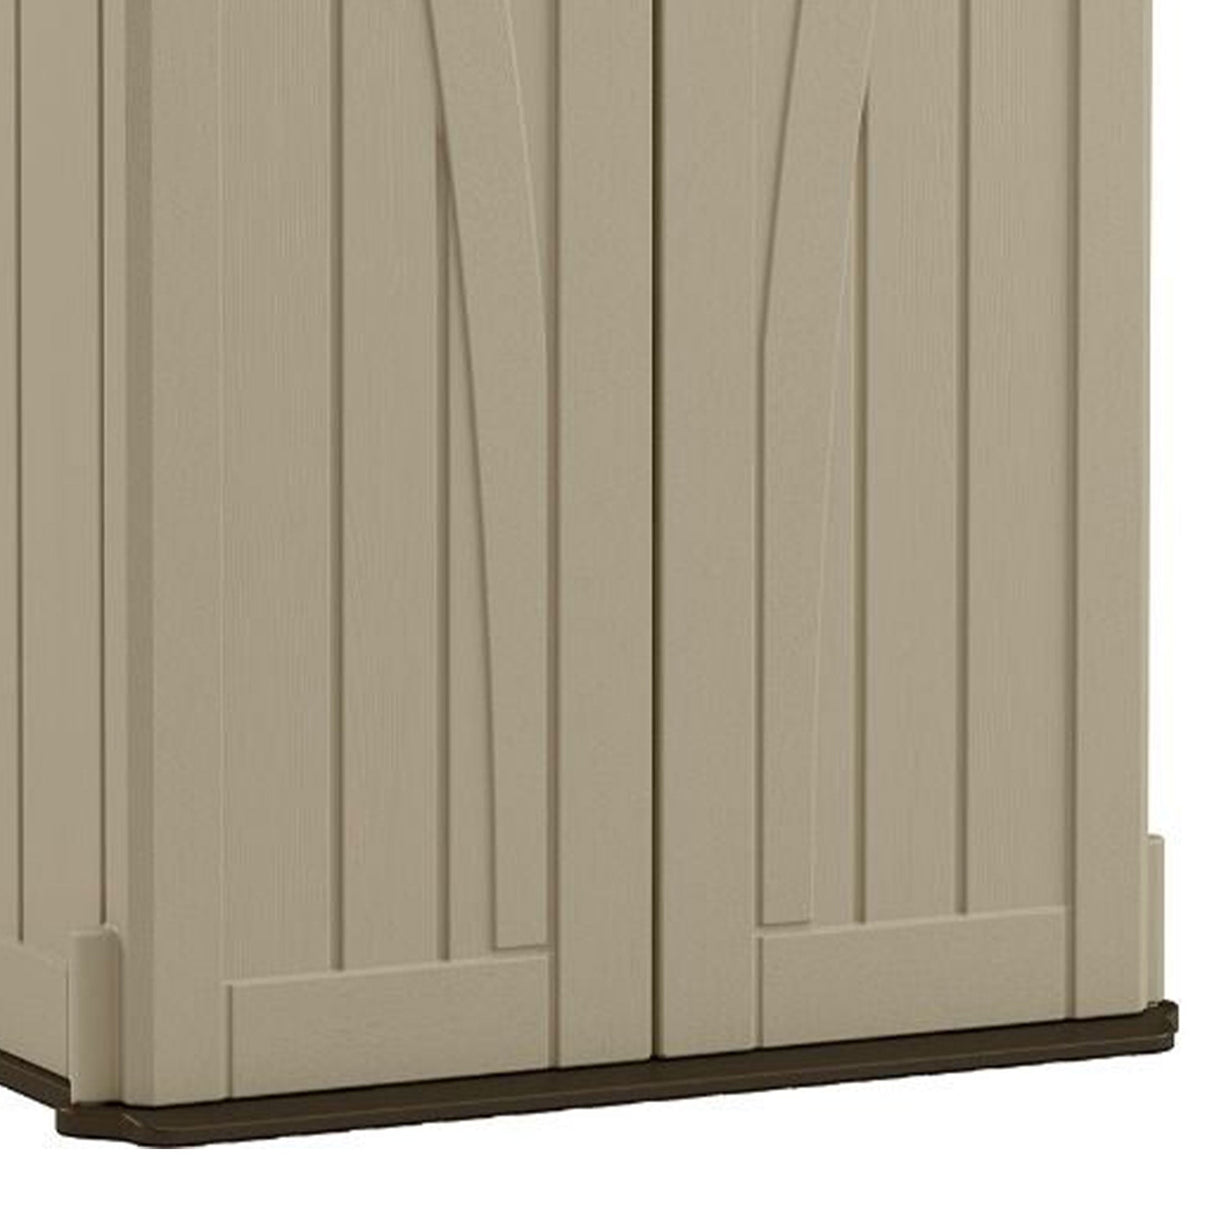 Suncast 22 Cubic Feet All-Weather Vertical Tall Outdoor Storage Shed, Brown